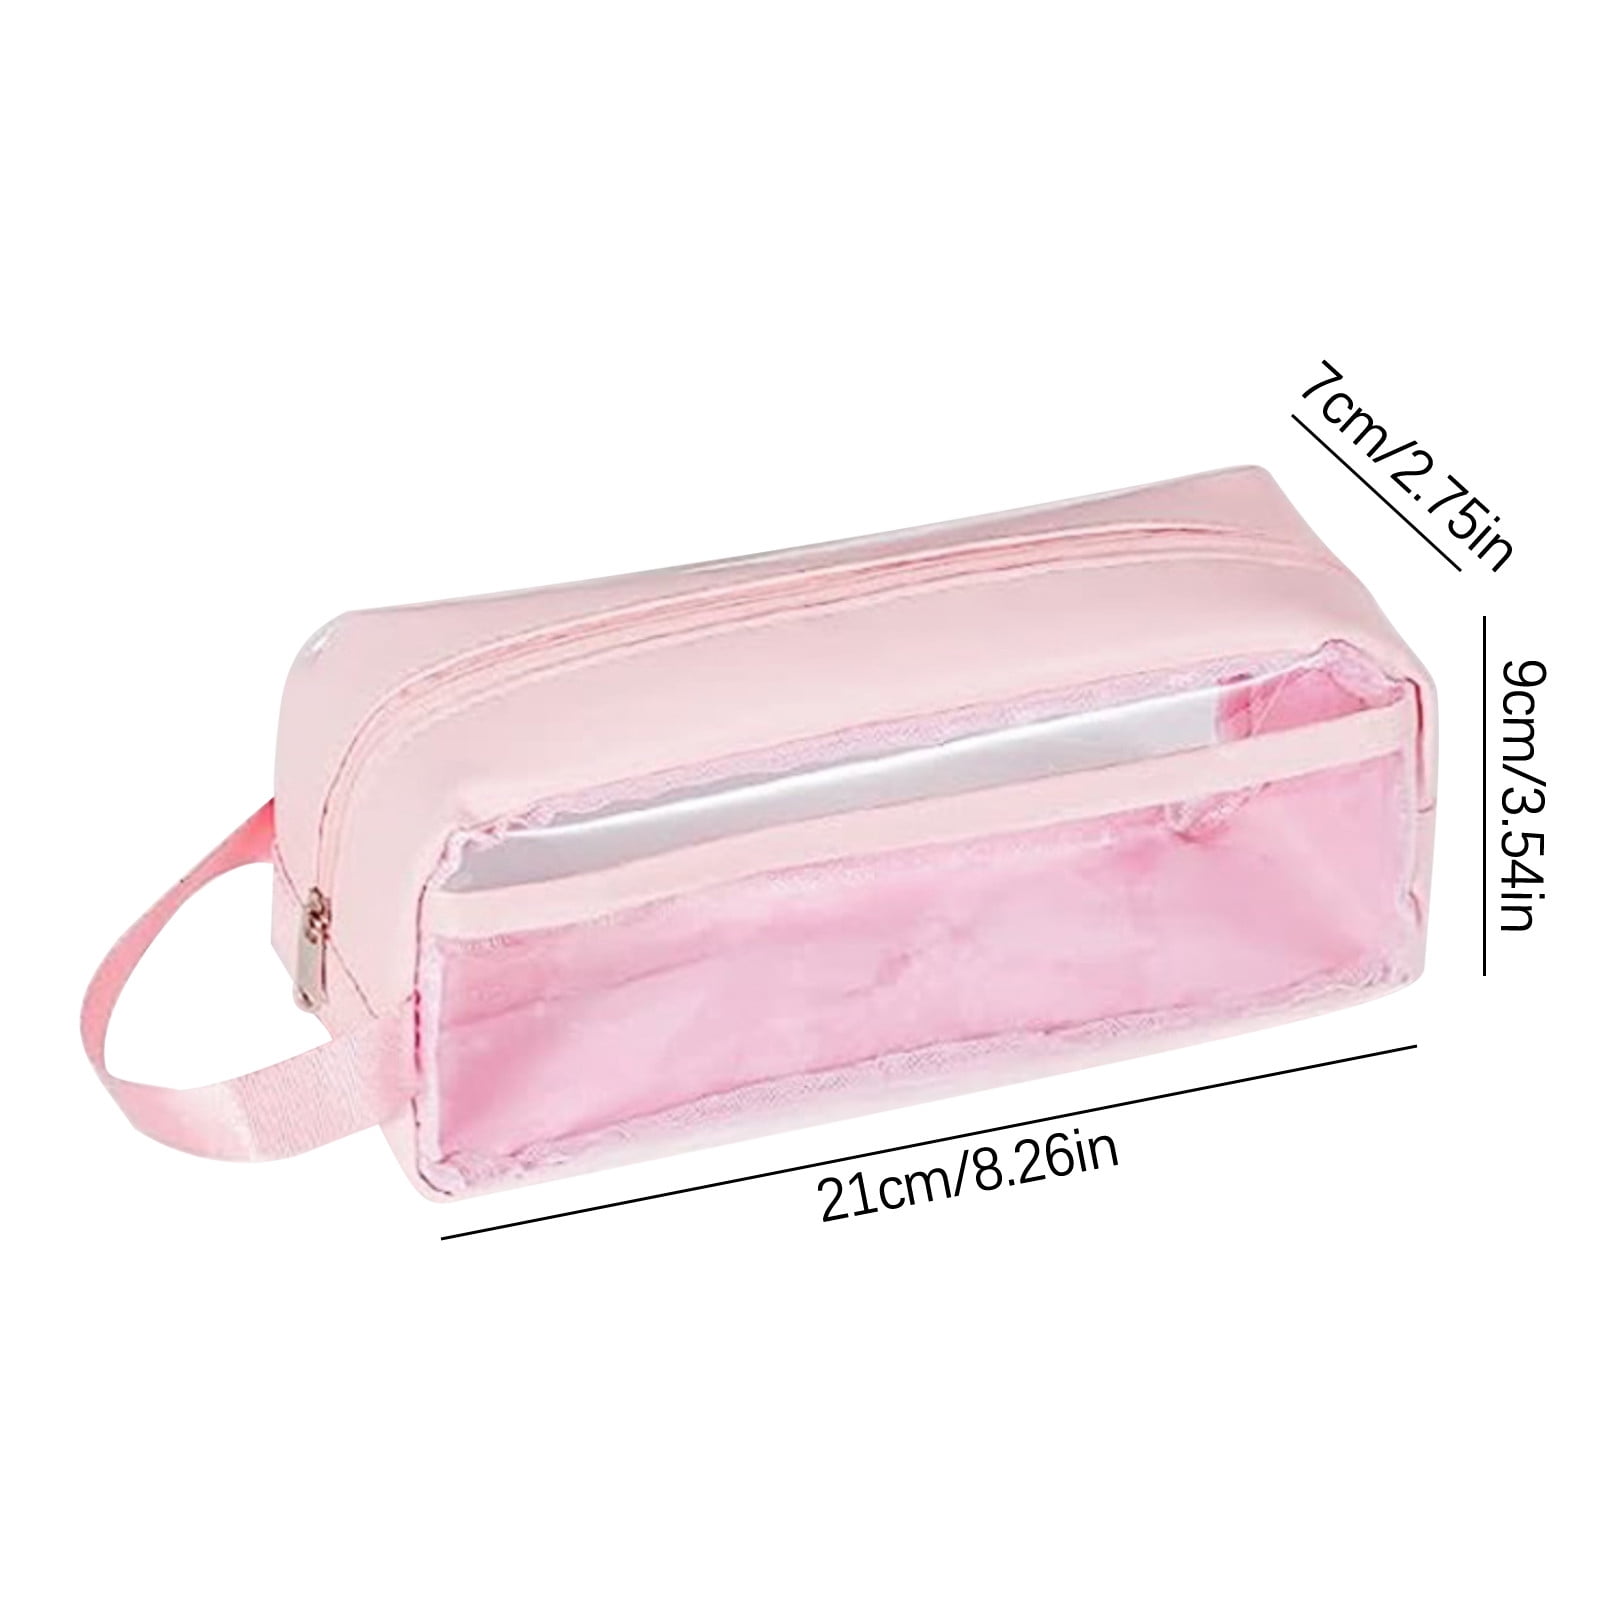 Wholesale Korean Transparent Pink Transparent Pencil Bag For Girls  Aesthetic Stationery Organizer With Zipper Pouch For School Supplies From  Soeasyshopping, $12.89